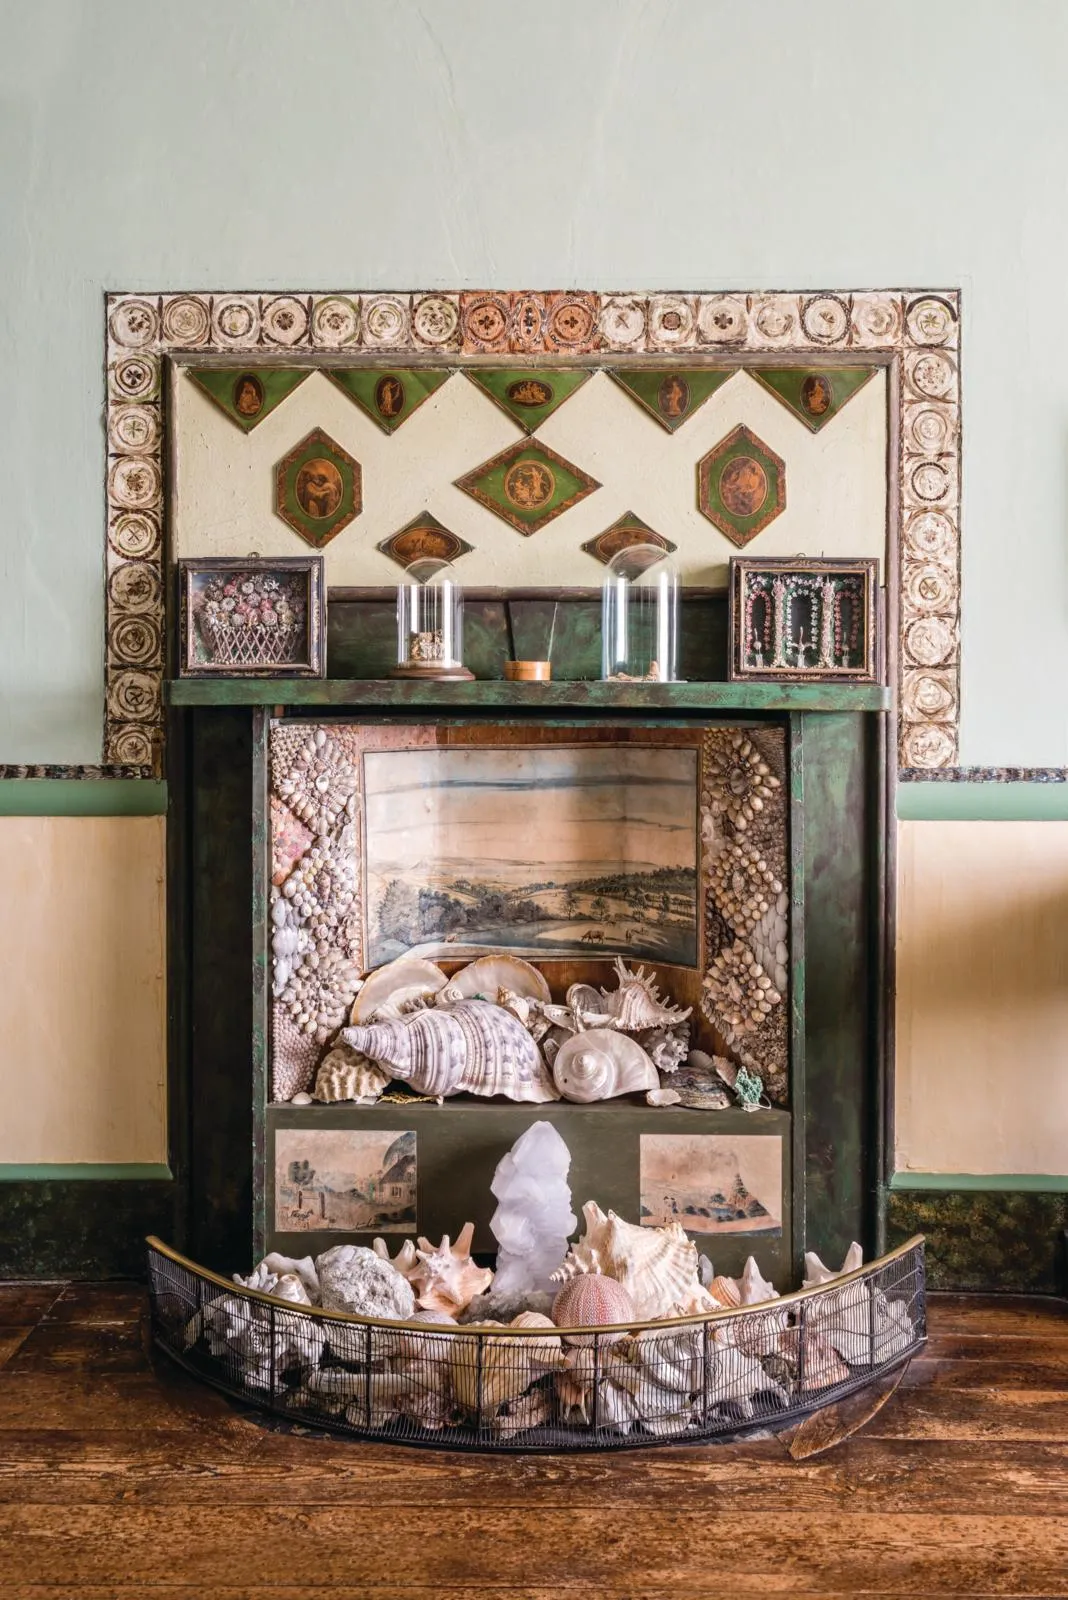 A la Ronde in Devon elaborately decorated fireplace